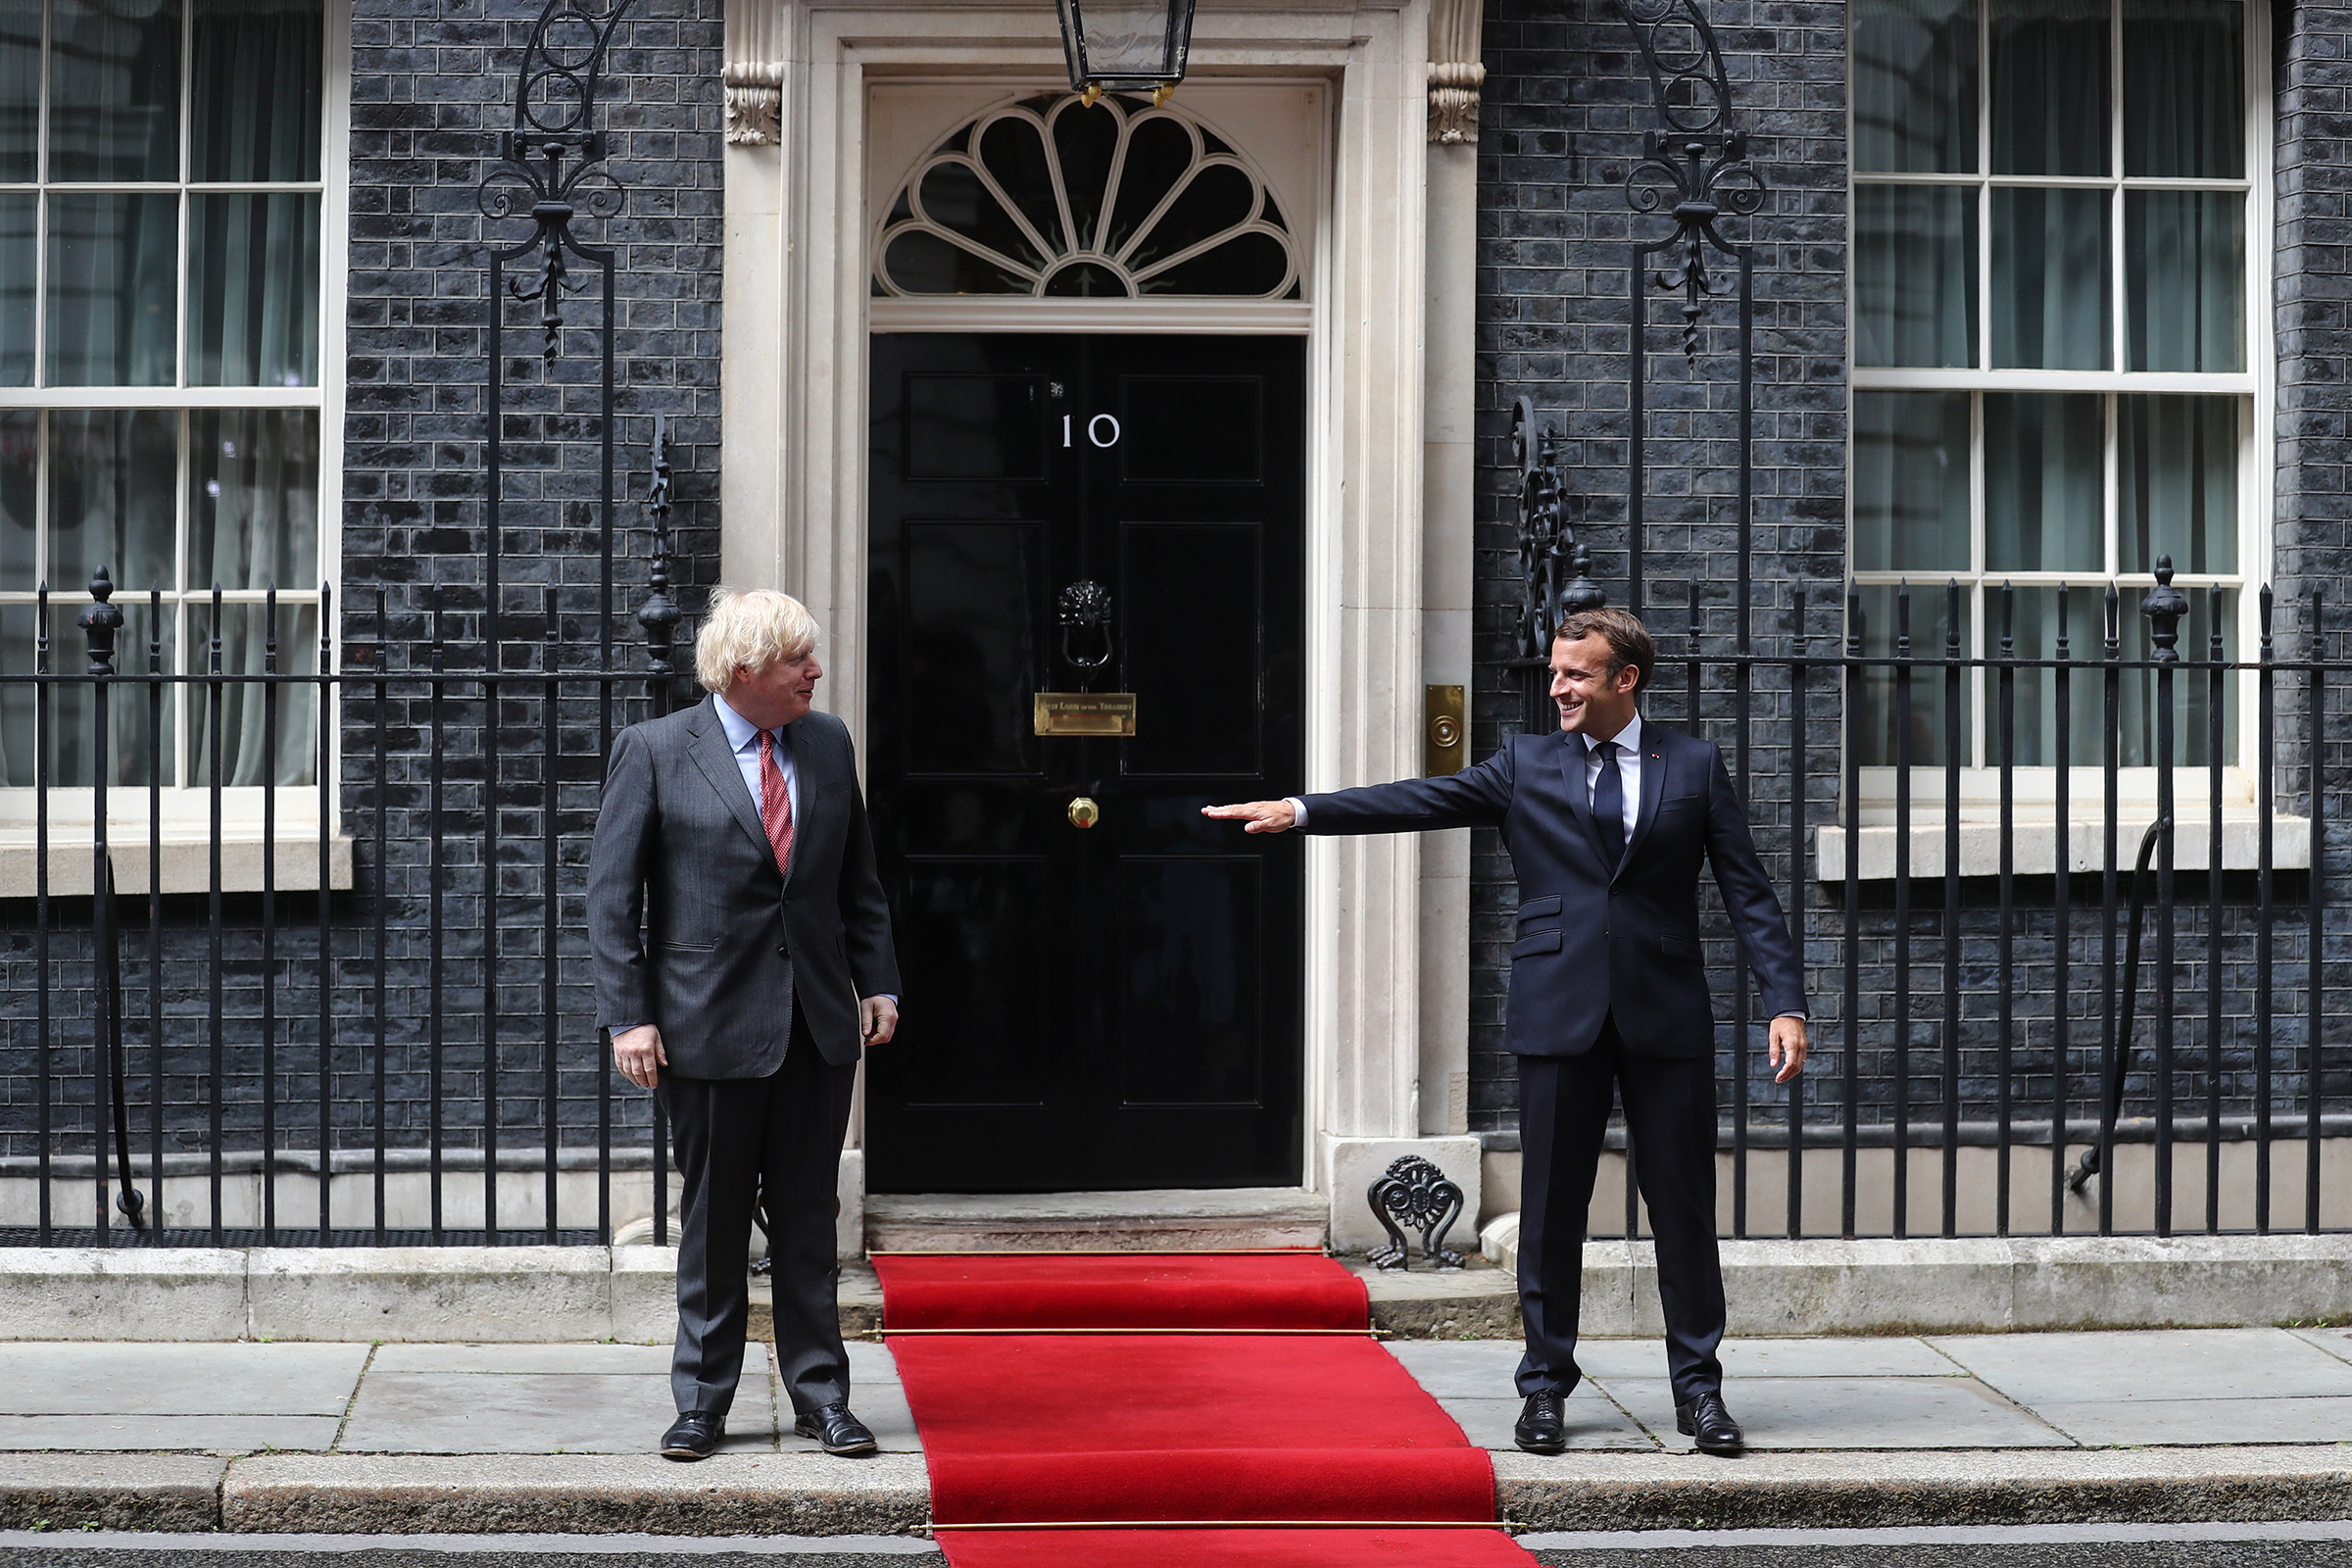 Boris Johnson, prime minister of the United Kingdom, and French President Emmanuel Macron stand socially distanced while posing for photographs at 10 Downing Street in London on June 18. (Simon Dawson—Bloomberg/Getty Images)